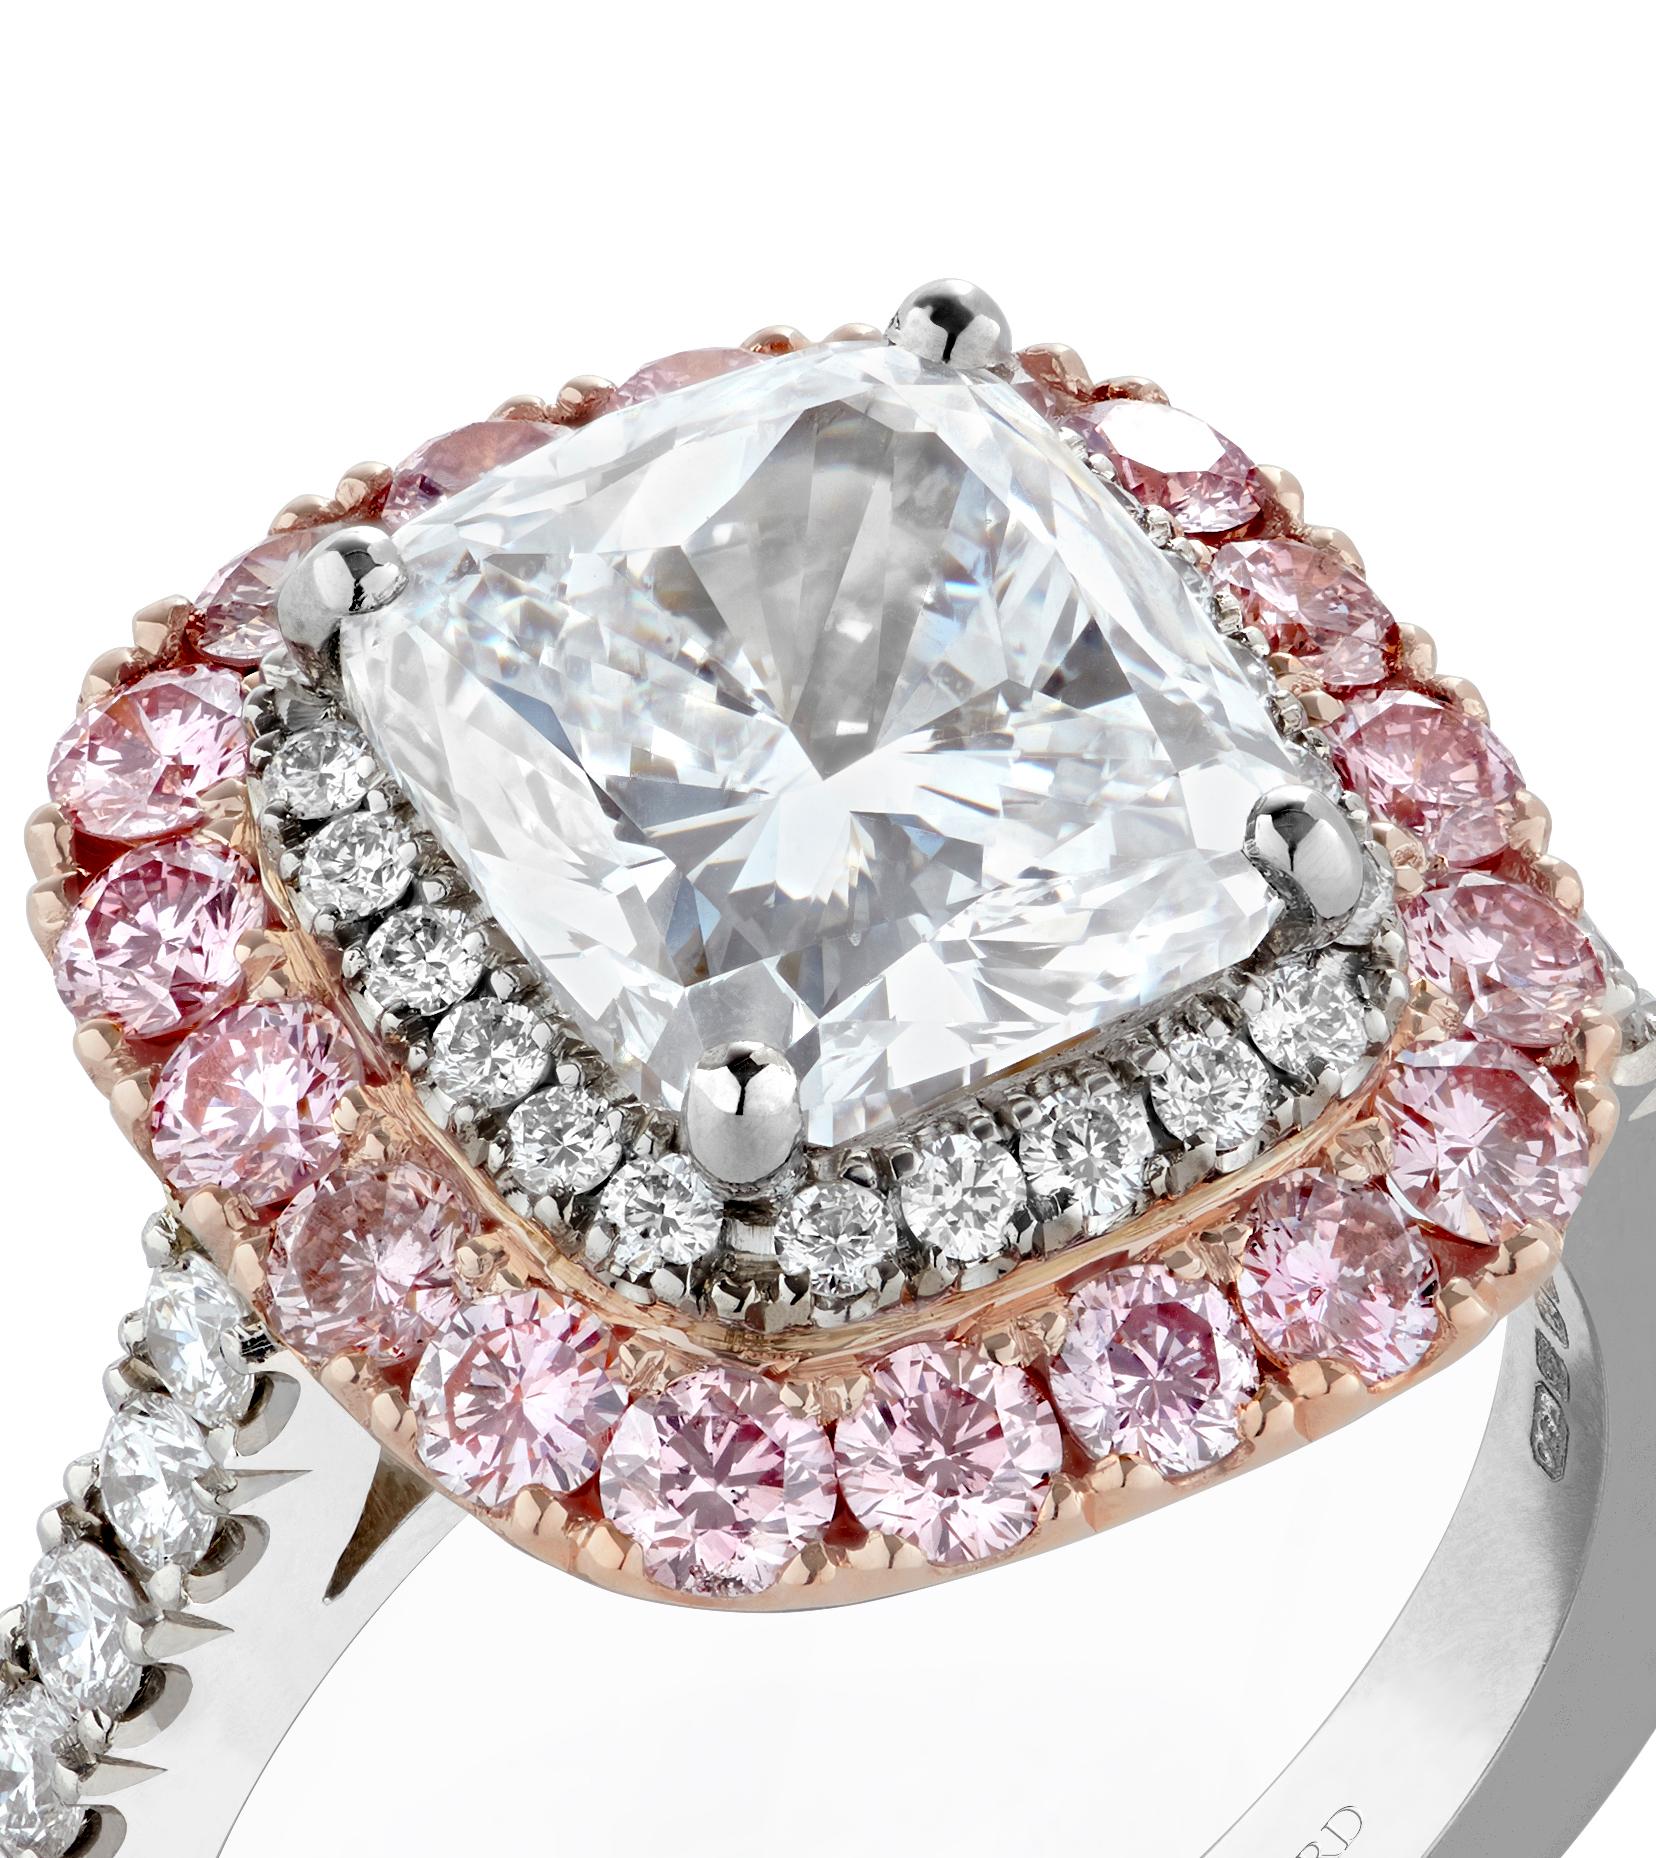 A House of Garrard platinum and 18 karat rose gold engagement ring from the Jewelled Vault collection, set with a central GIA certified cushion cut 3.06 carat D VS1 white diamond, 18 round pink diamonds weighing 0.84 carats and 36 round white